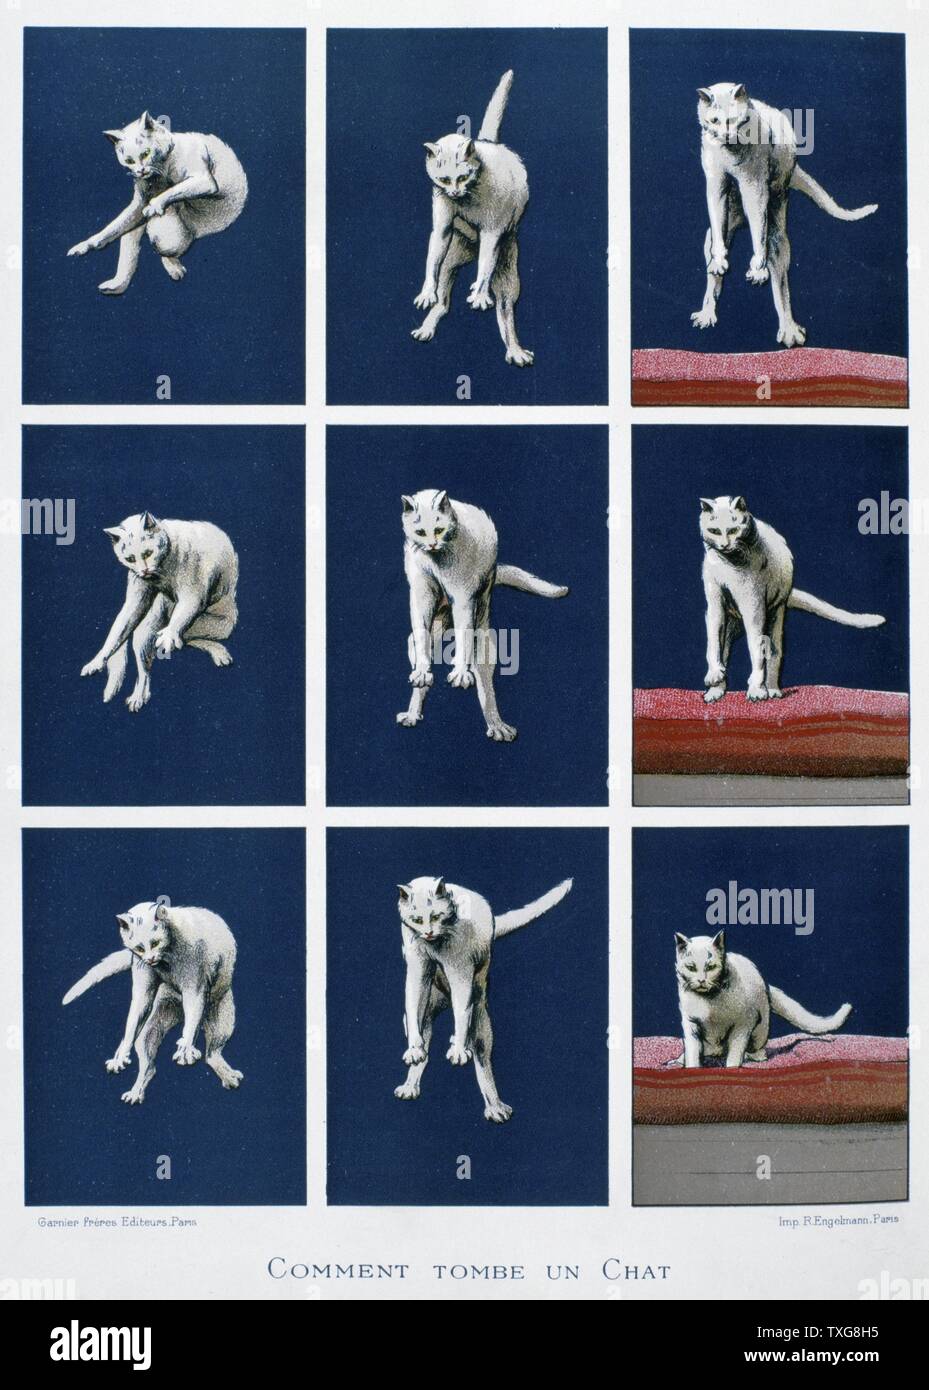 Series of frames of a cat falling  Cinematography by Muybridge and Marey  to study the locomotion of animals From  'Les dernieres merveilles de la science' (The Latest Marvels of Science) - Paris Stock Photo